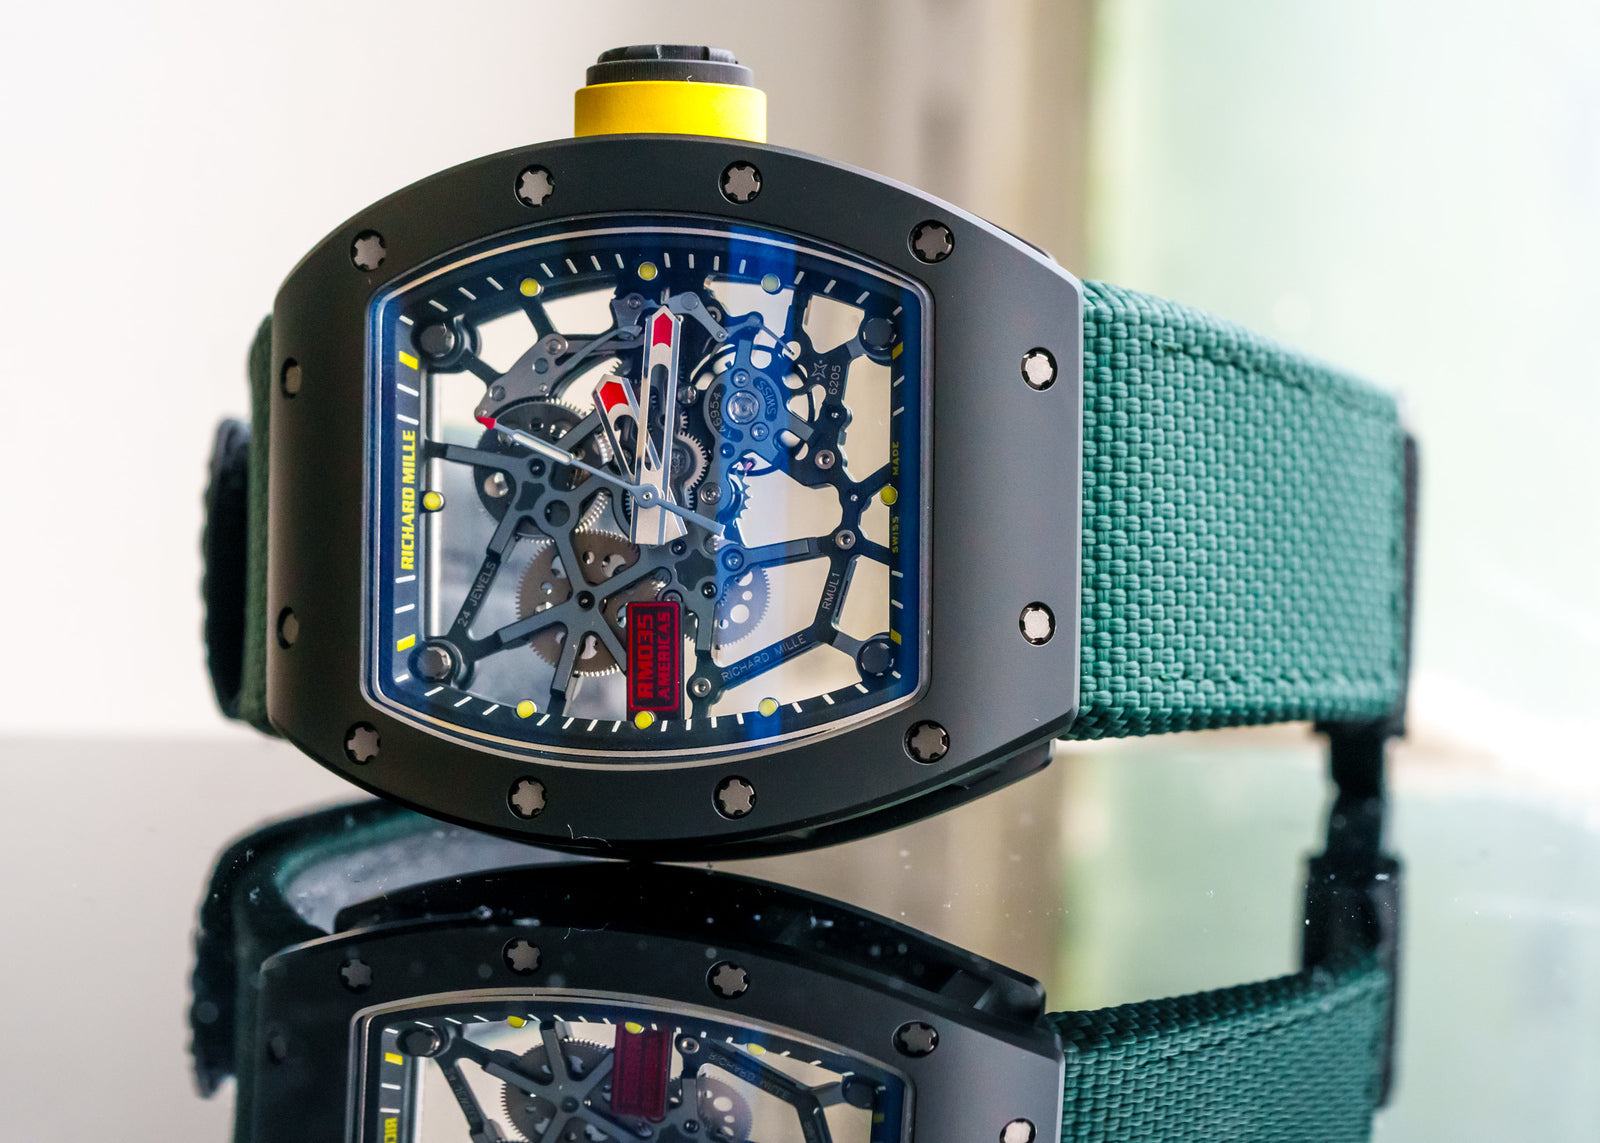 Richard Mille Rm035 Americas (50 Piece Limited Edition)